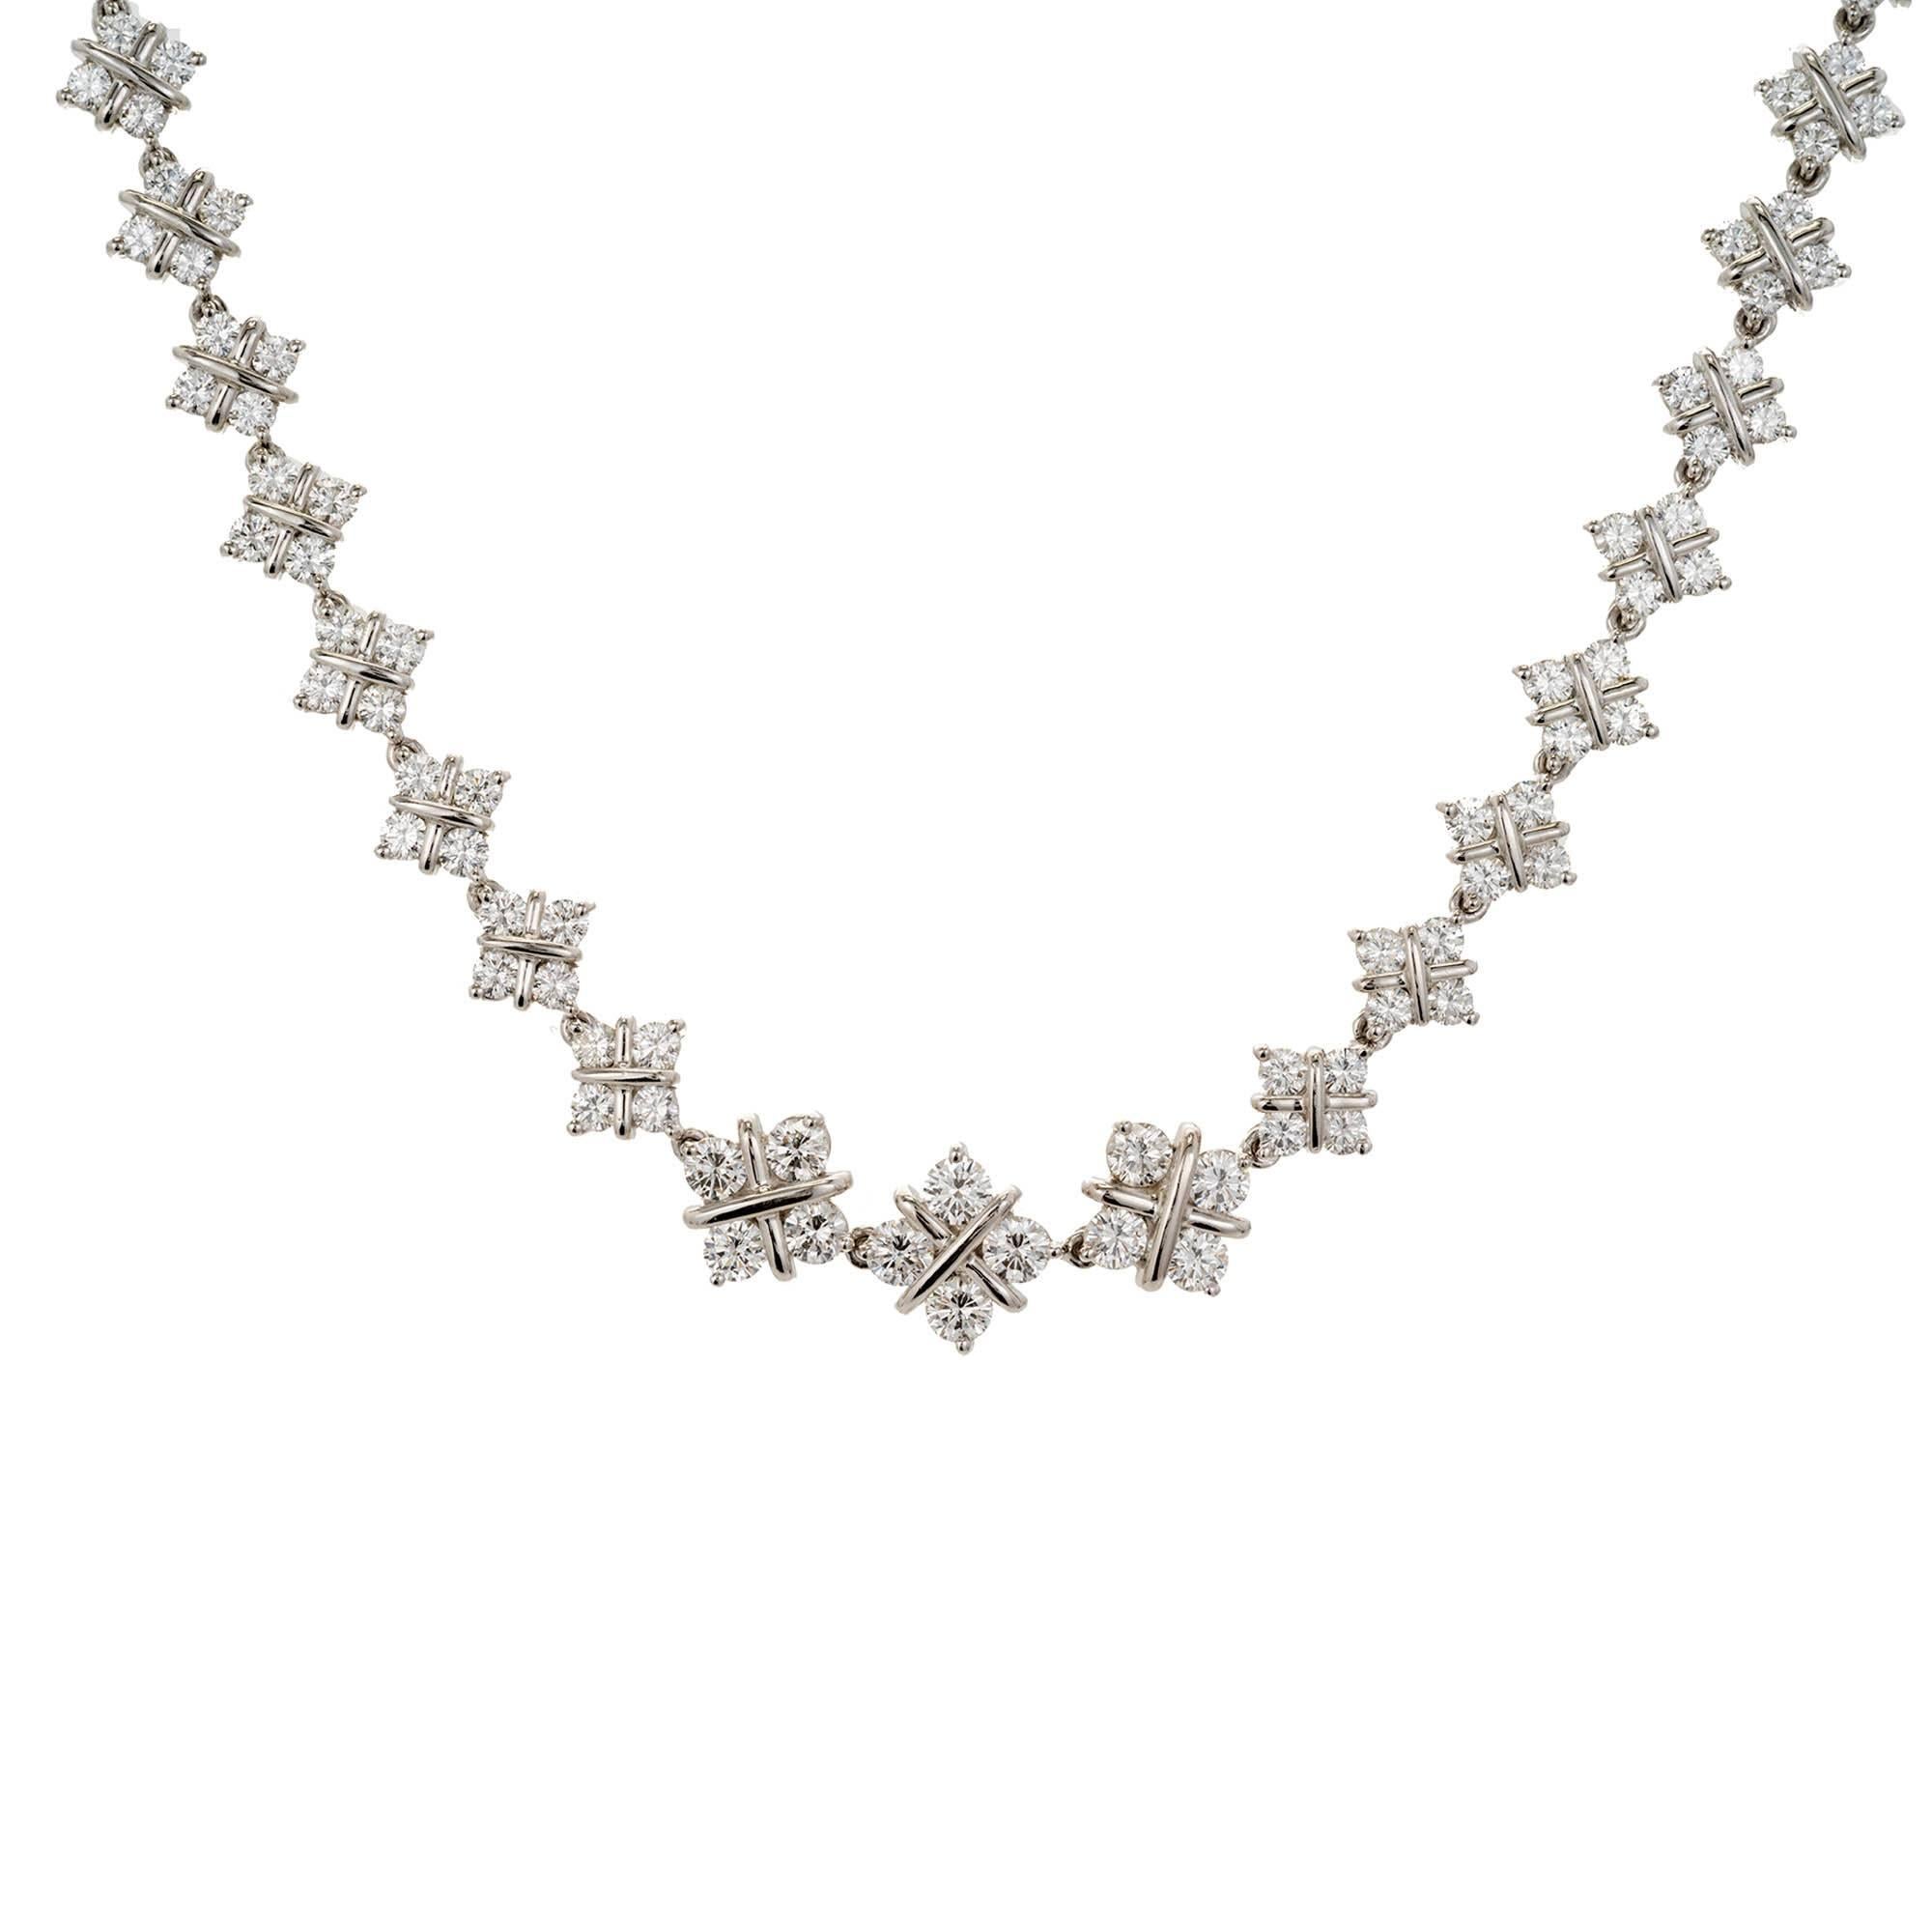 Solid platinum diamond necklace with 10.98 carats of ideal round diamonds in a graduated handmade wire X link. 15 Inch Length. Hidden built in catch and underside safety.

196 round diamonds full cut F-G VSI approximate total carats 10.98
Total